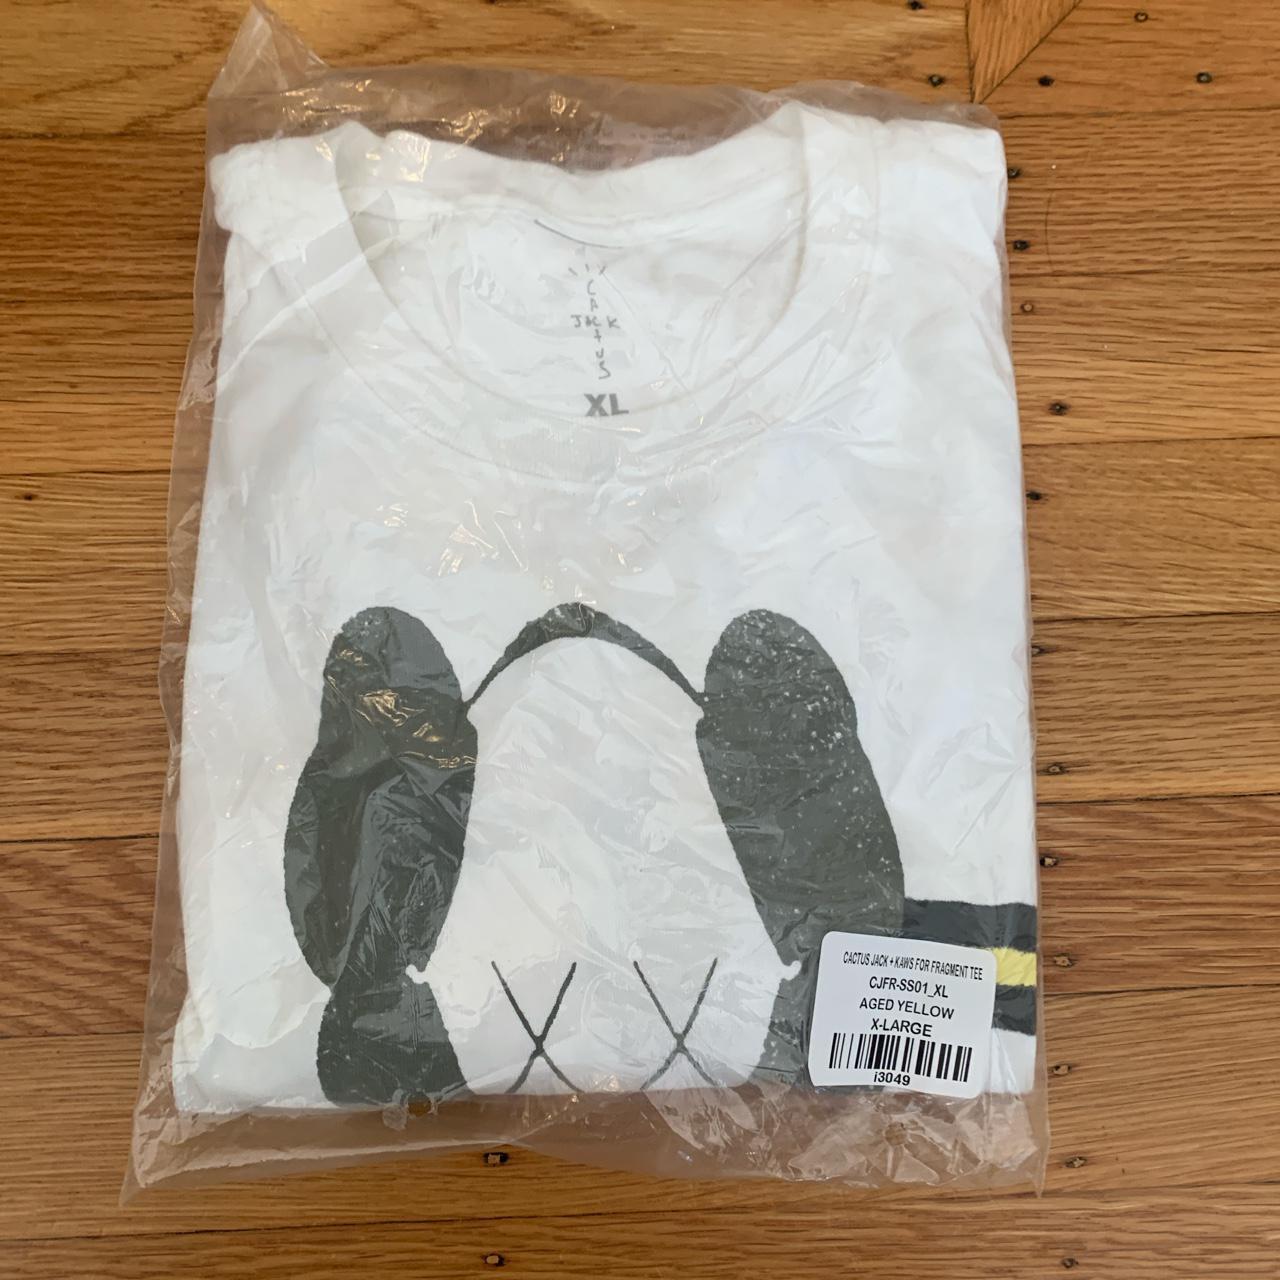 Cactus Jack by Travis Scott Kaws for Fragment Tee